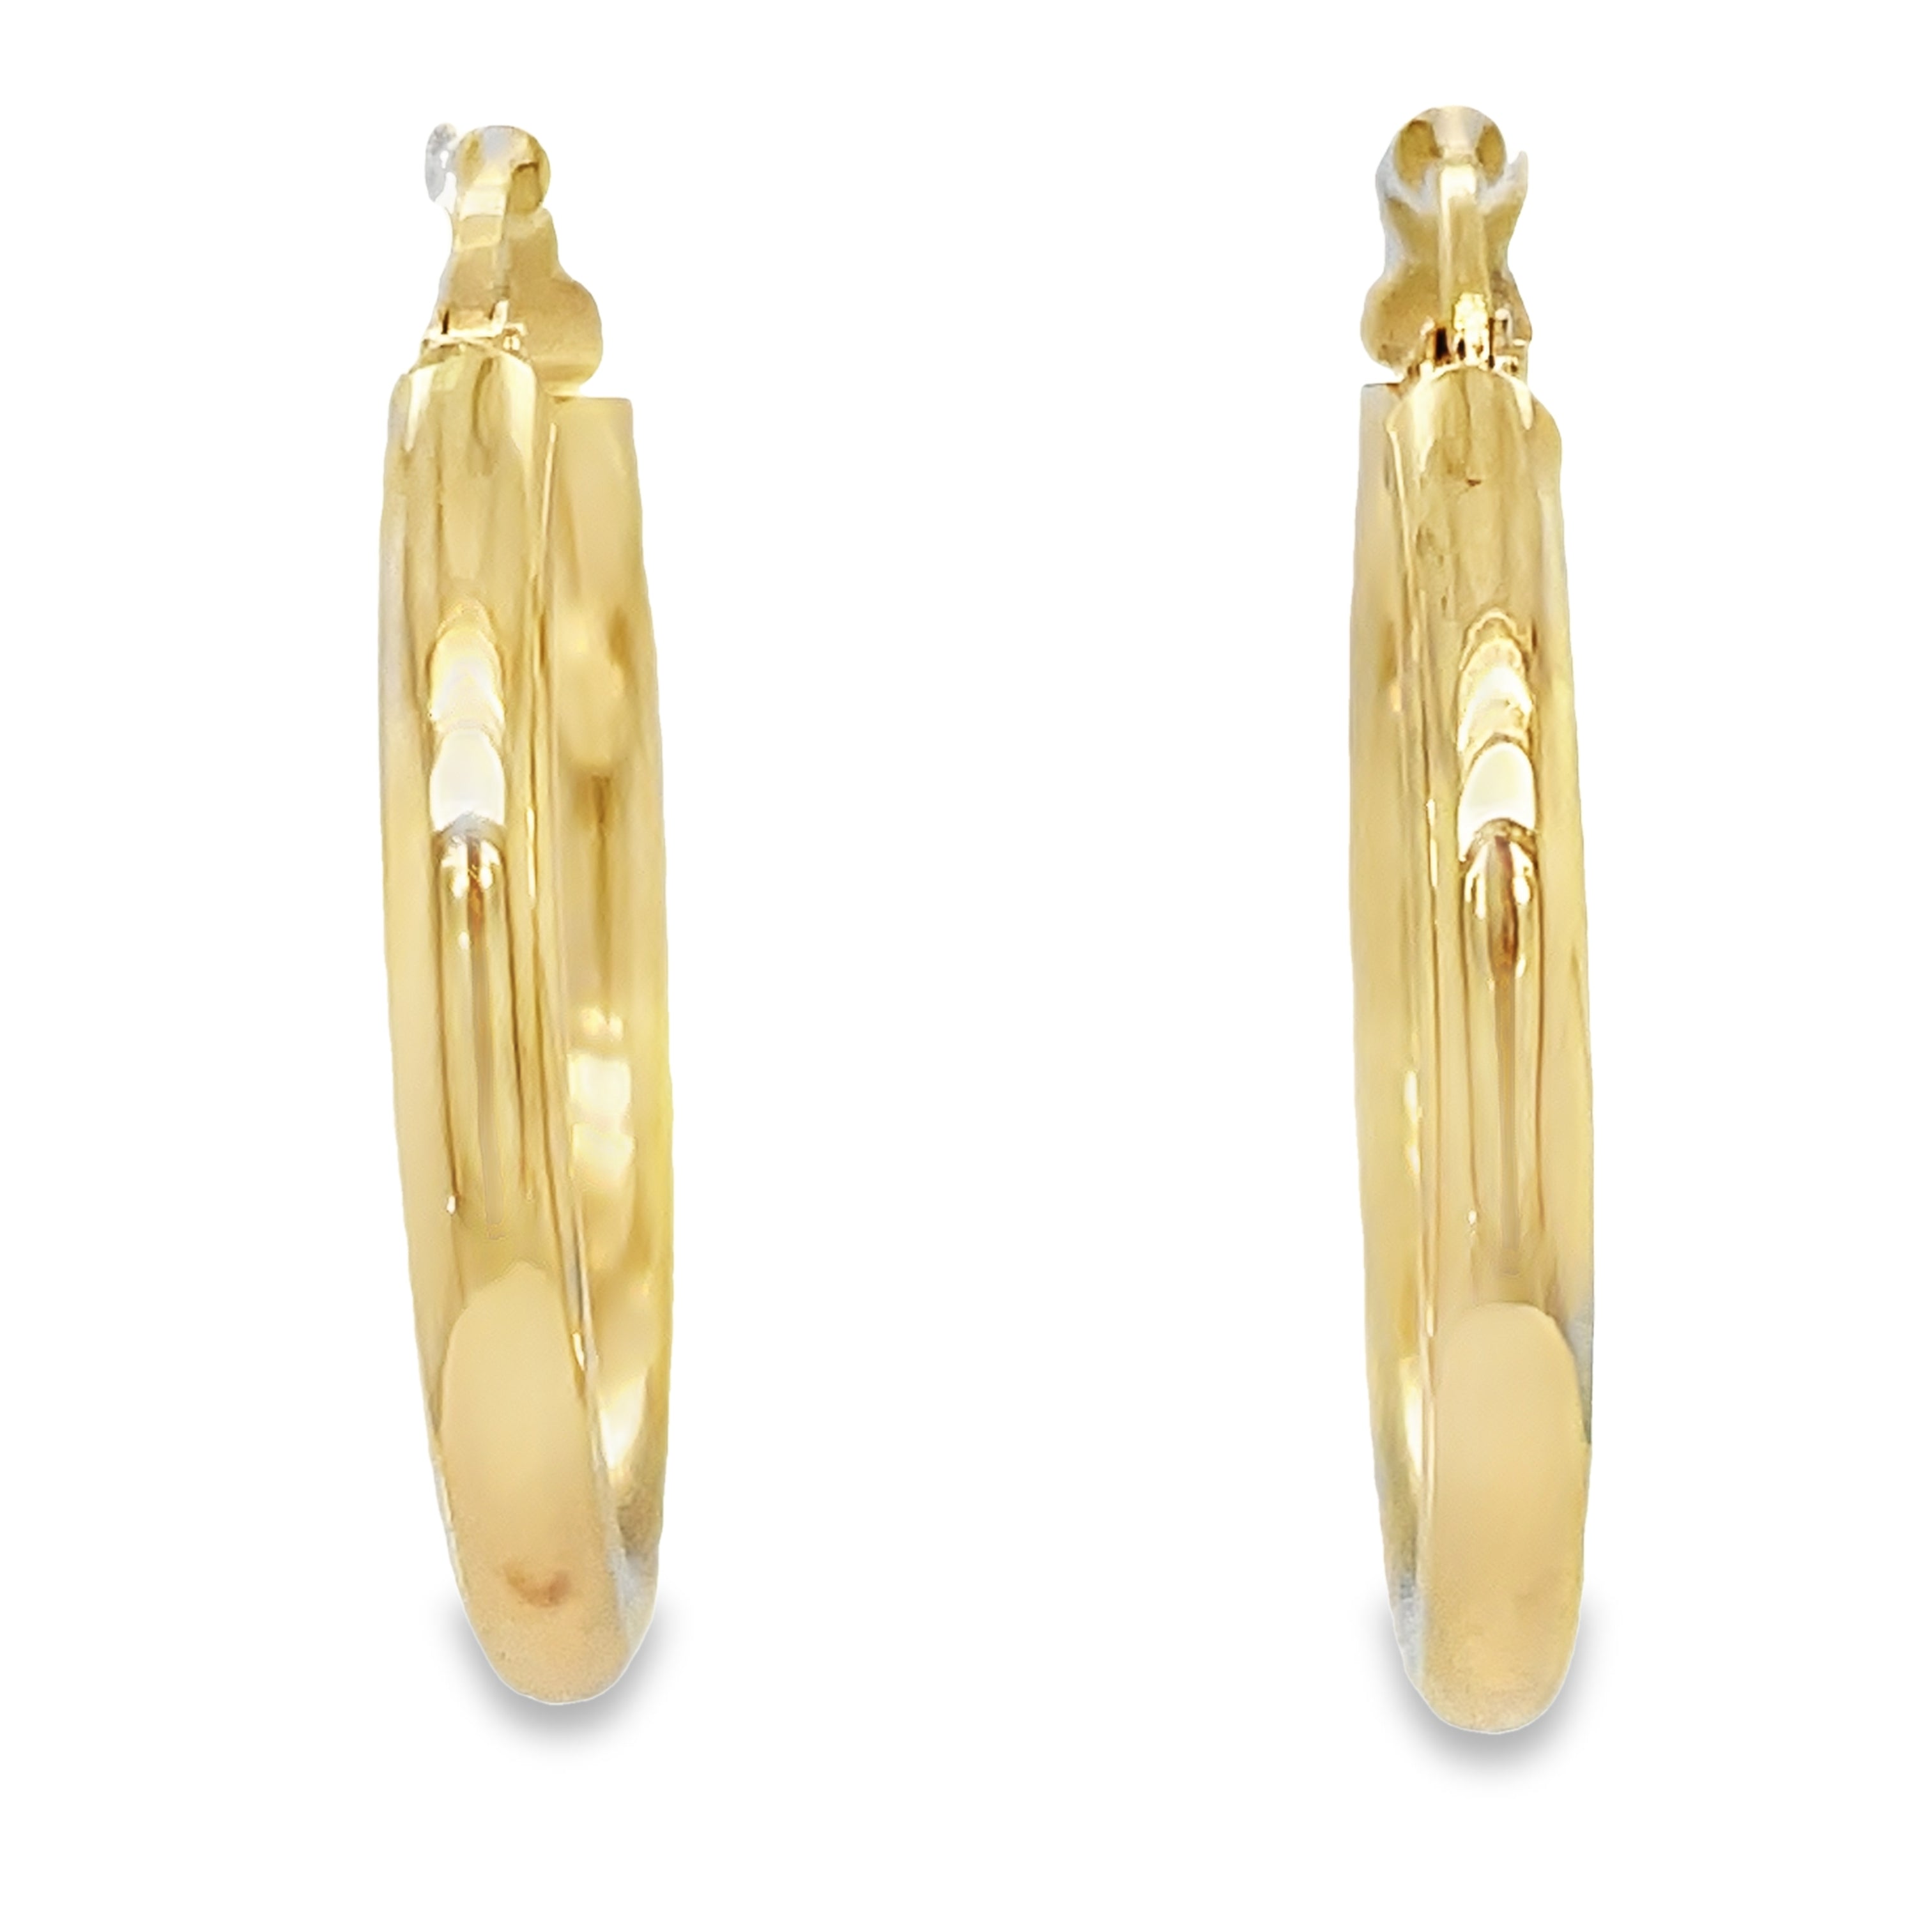 Experience elegance and style with our 14k Italian Yellow Gold Small Hoop Earrings! These beautiful earrings are crafted with 14k yellow gold and measure 3.00 mm thick. The secure lever system ensures they stay in place all day, making these 1-1/4" hoop earrings the perfect addition to any outfit. Elevate your look with these versatile and timeless earrings.